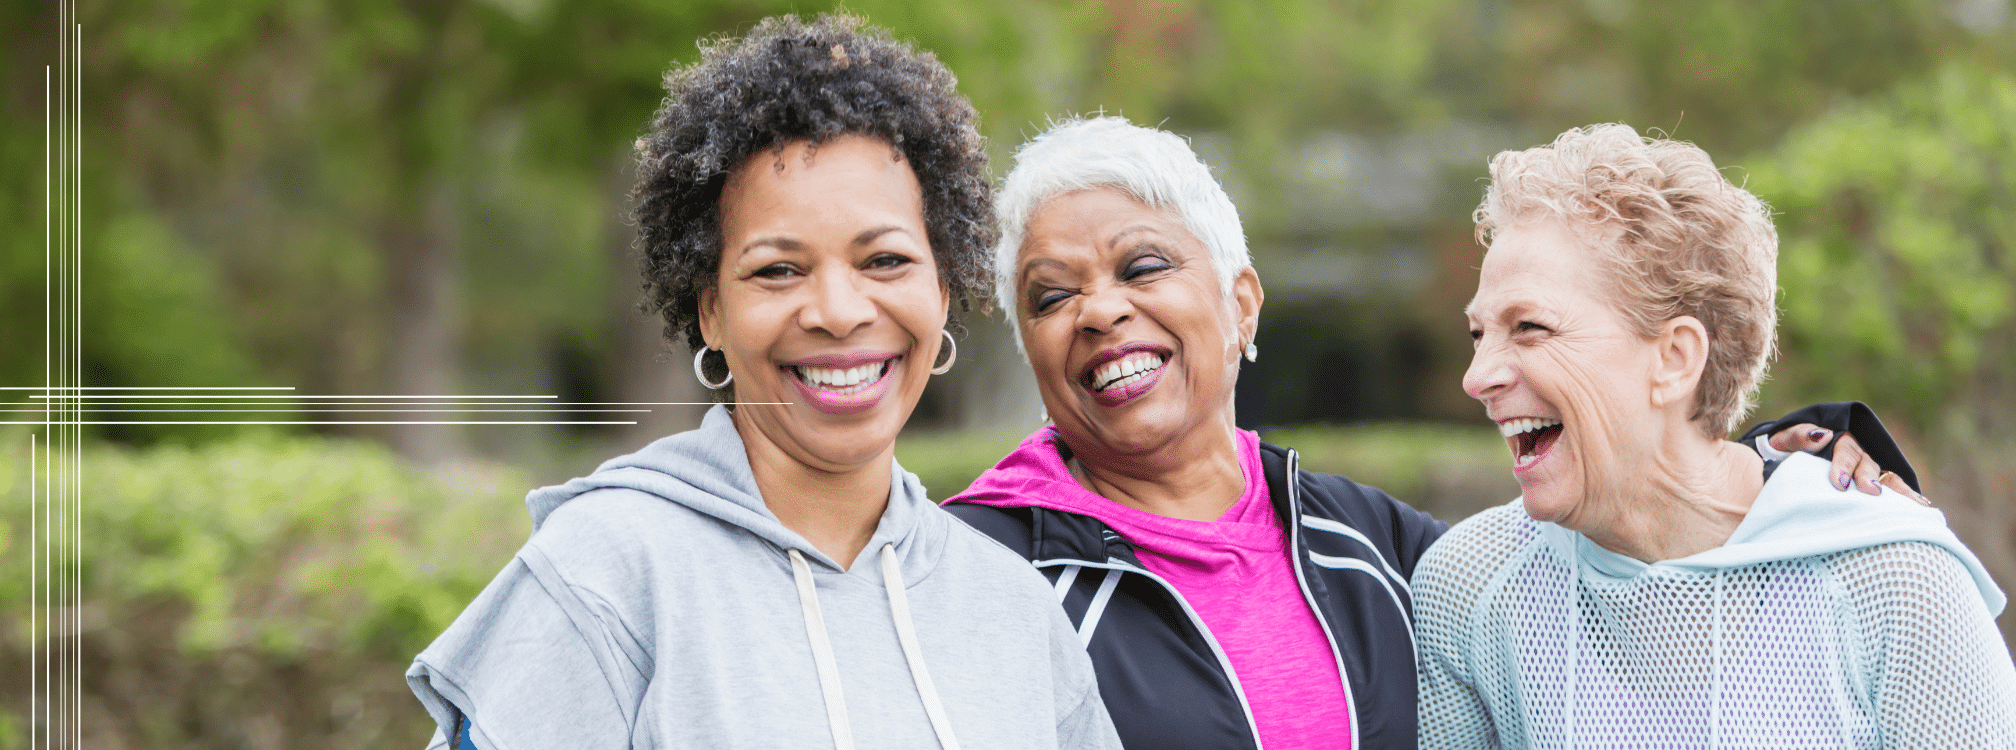 senior women smile and share a laugh